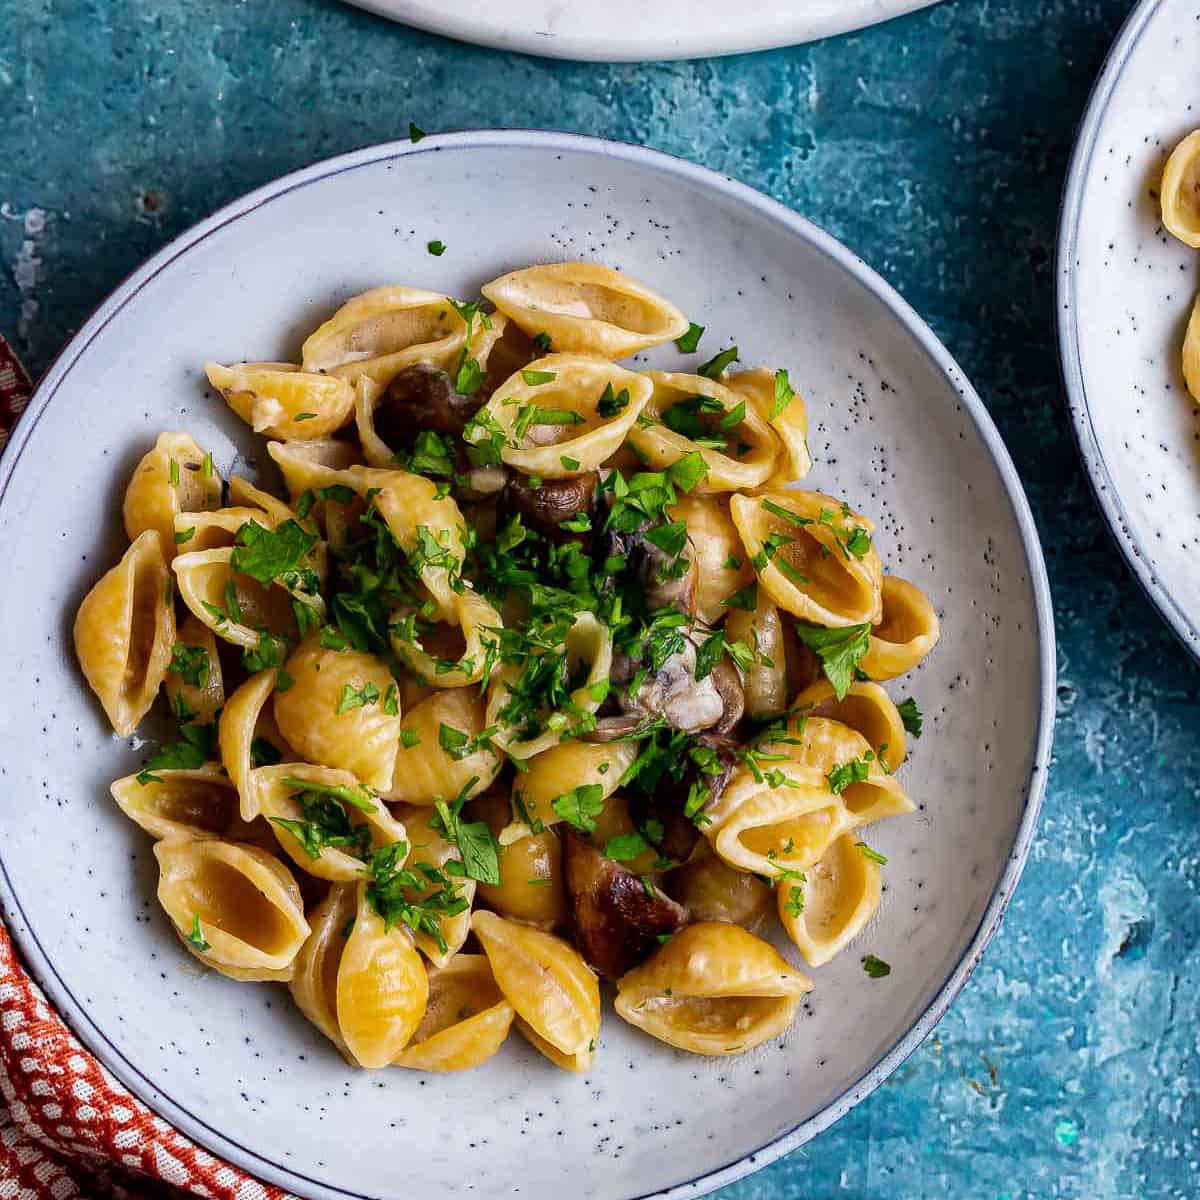 Creamy miso pasta with chicken and mushrooms